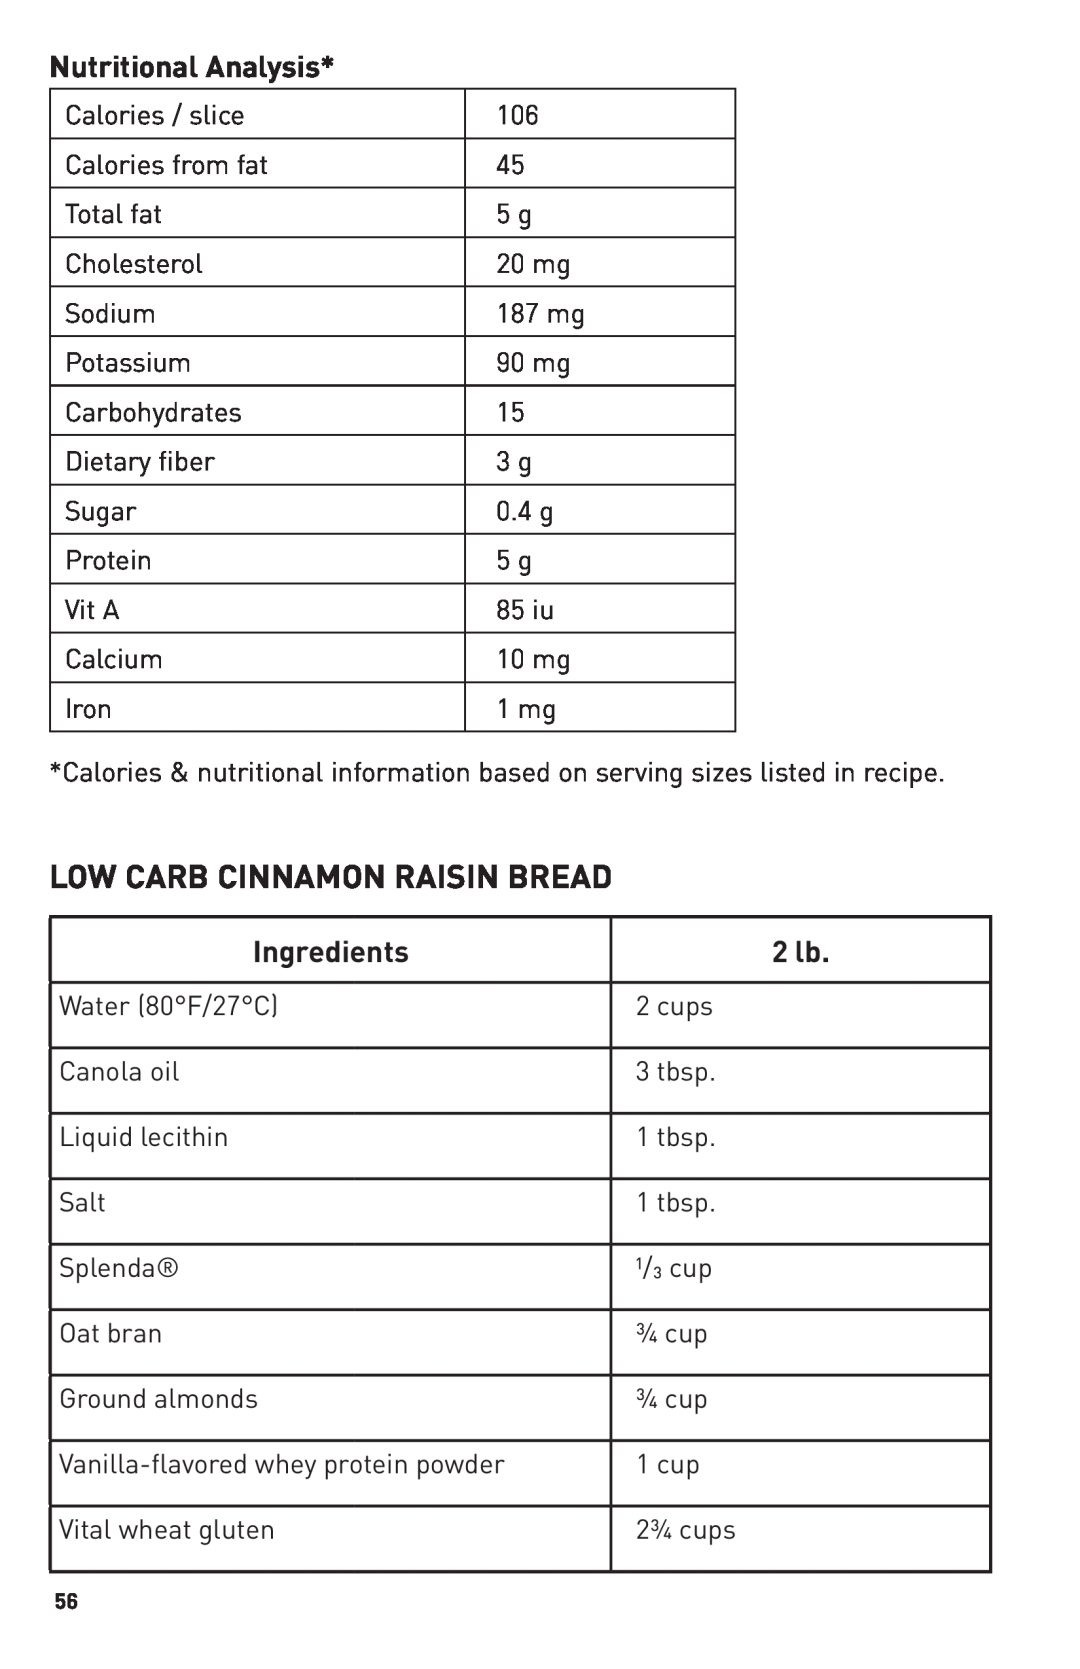 Breadman TR2500BC, Bring Home the Bakery manual Low Carb Cinnamon Raisin Bread, Nutritional Analysis, Ingredients, 2 lb 